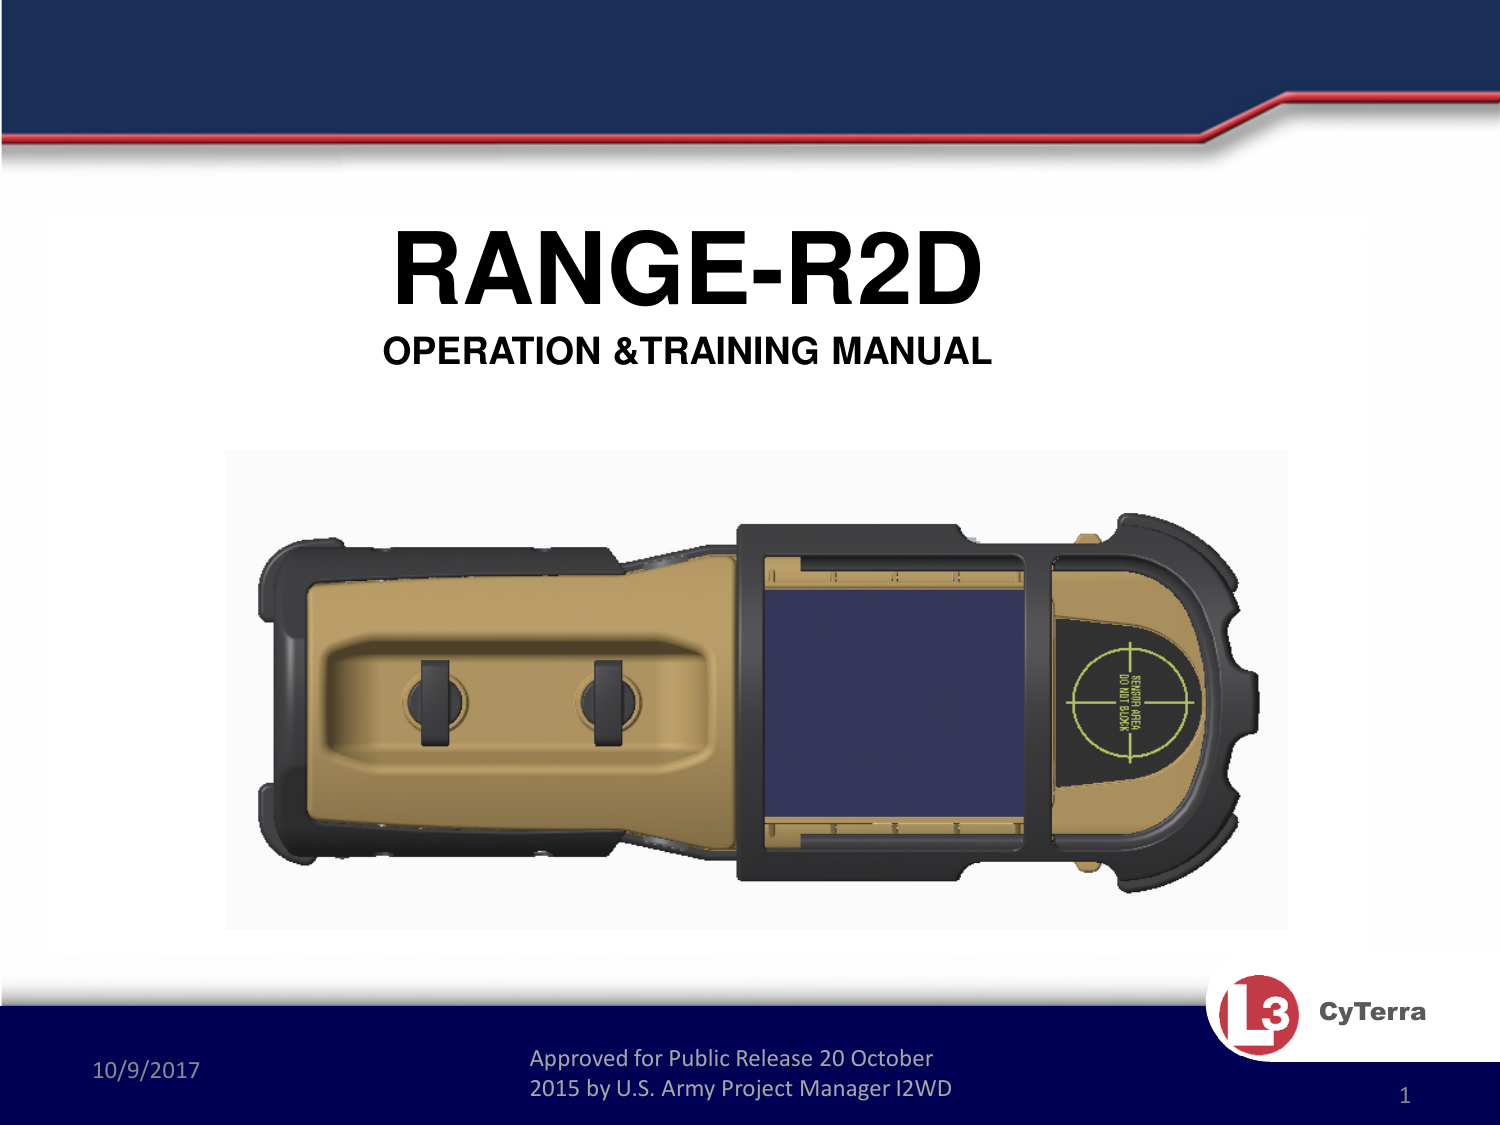 Approved for Public Release 20 October 2015 by U.S. Army Project Manager I2WD10/9/2017 Approved for Public Release 20 October 2015 by U.S. Army Project Manager I2WD 1CyTerraRANGE-R2DOPERATION &amp;TRAINING MANUAL